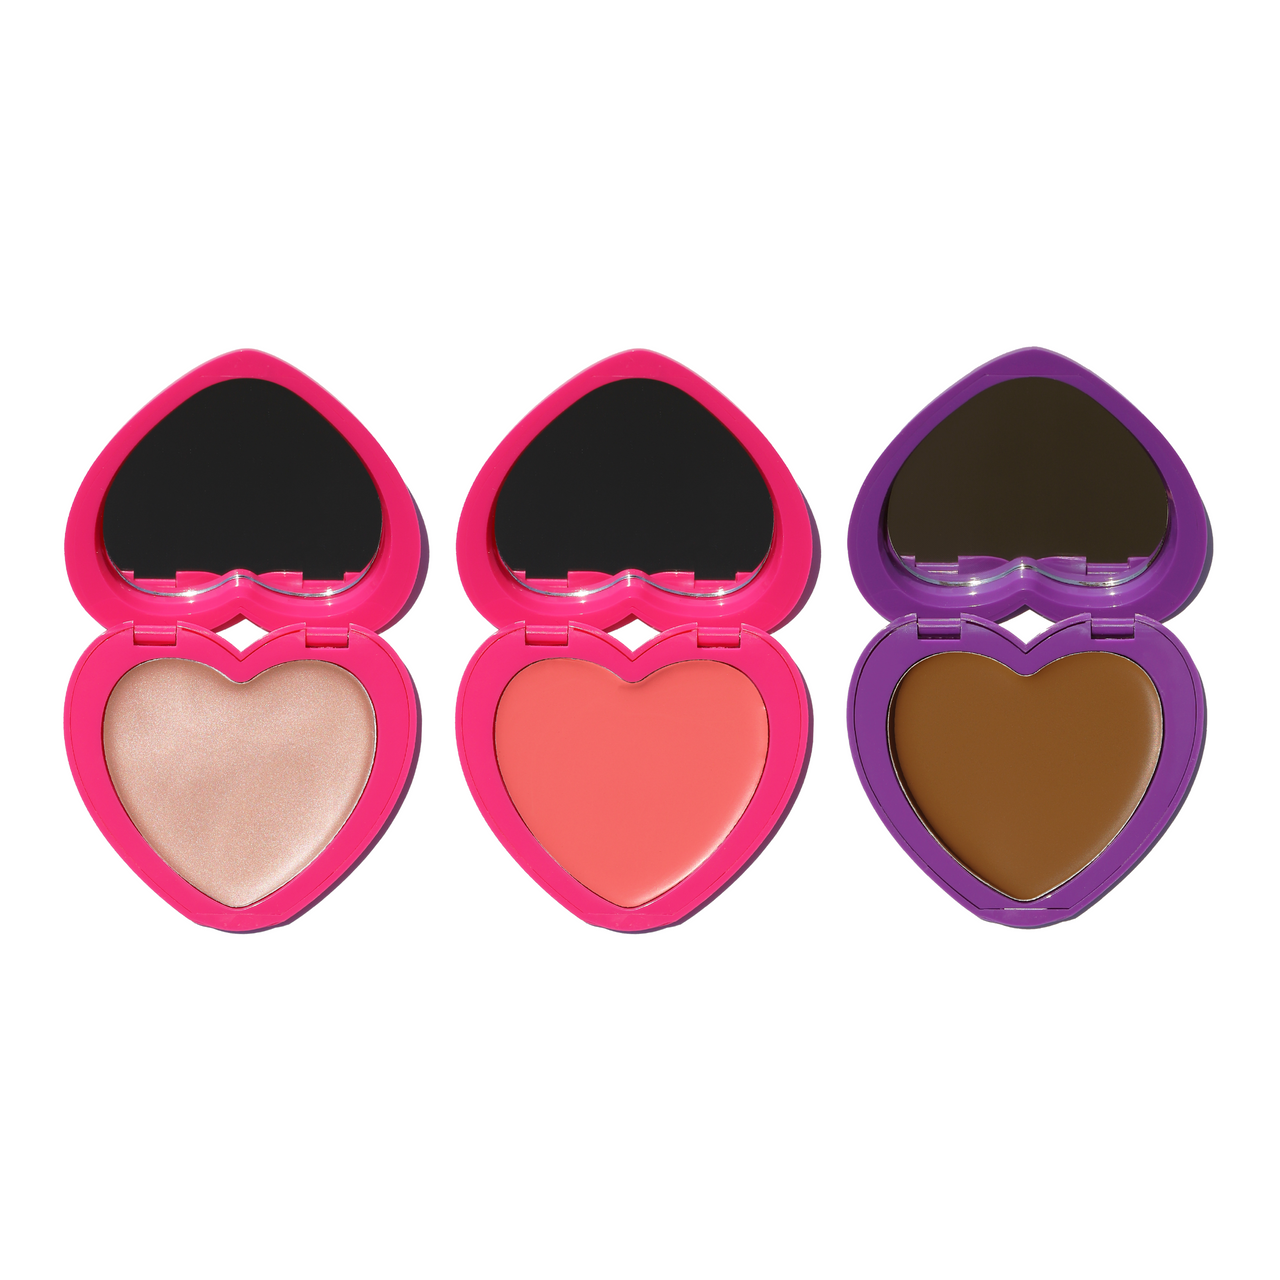 Candy Paint Trifecta set with heart-shaped compacts: cream highlighter, blush, and bronzer.